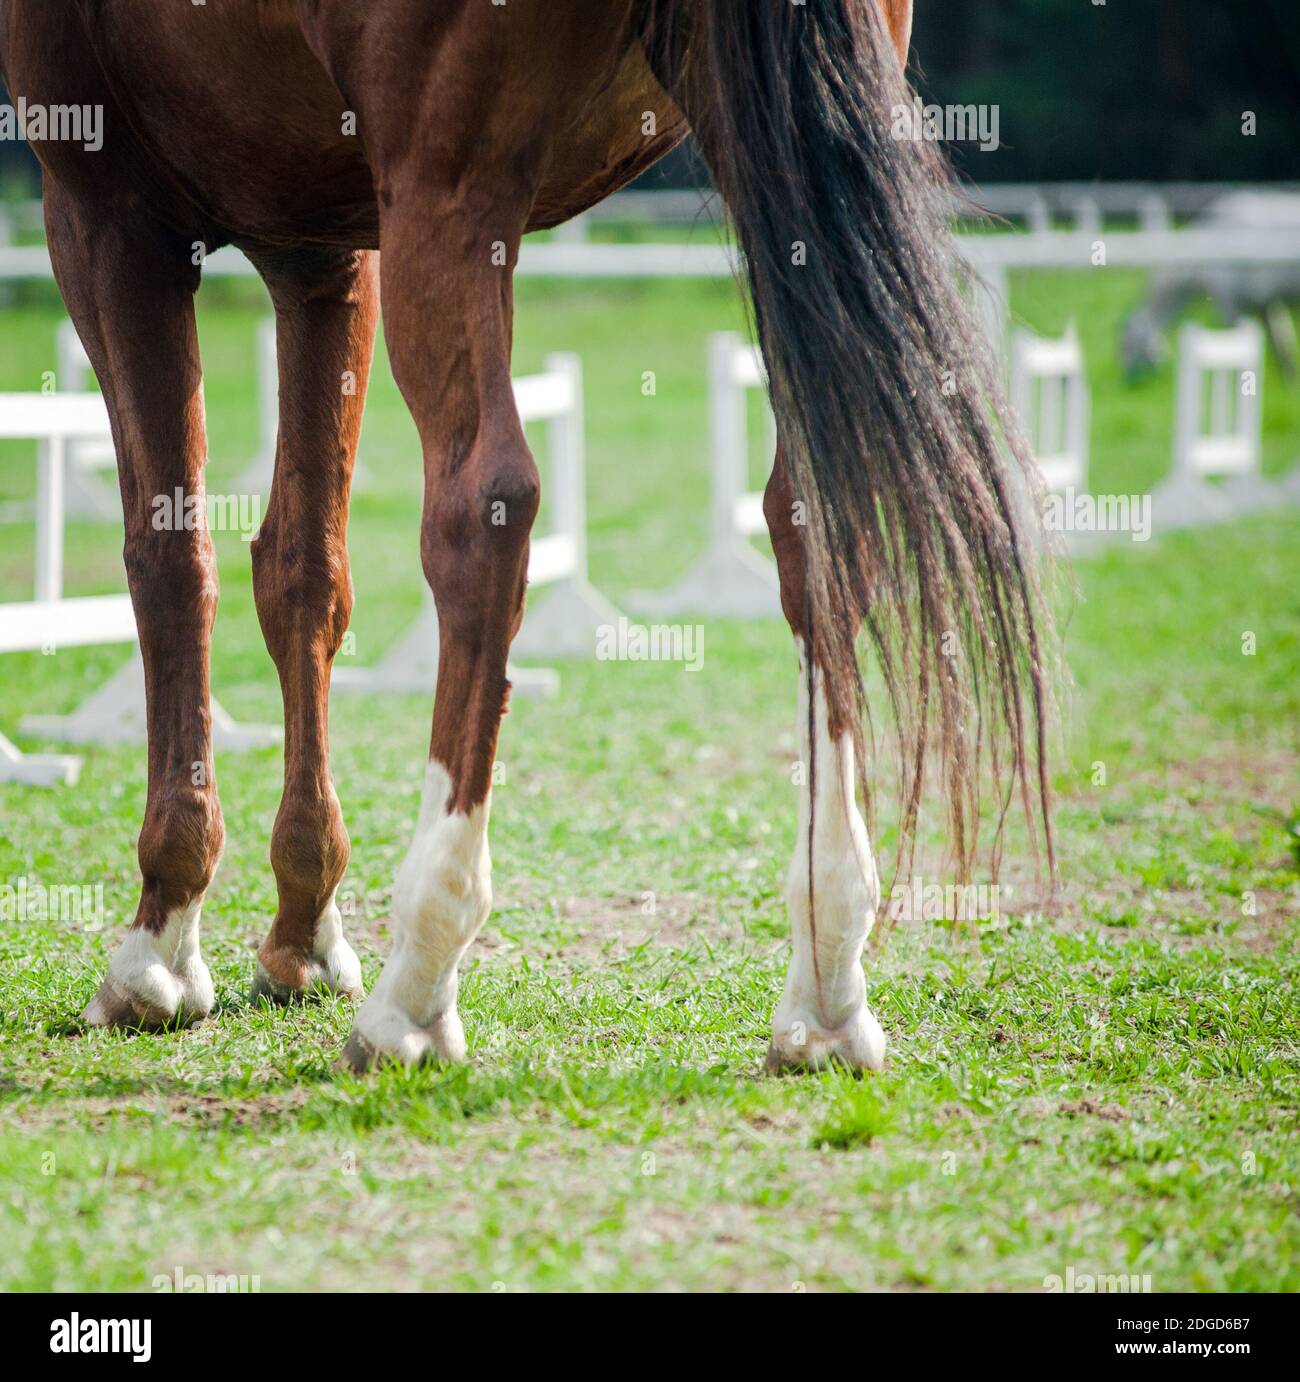 Horse hooves close up at equestrian events Stock Photo